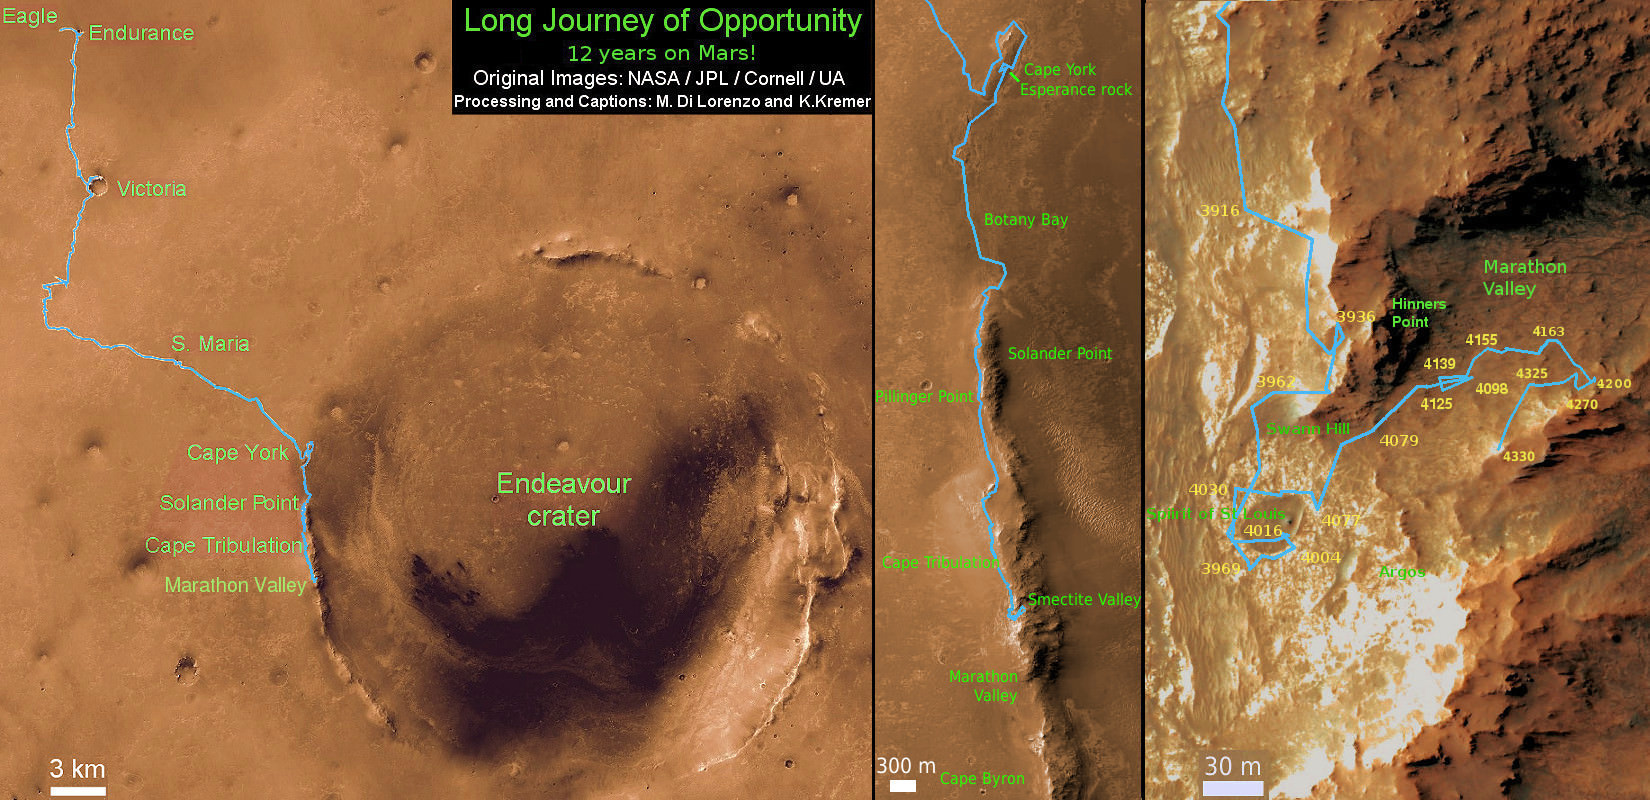 12 Year Traverse Map for NASA’s Opportunity rover from 2004 to 2016. This map shows the entire path the rover has driven during almost 12 years and more than a marathon runners distance on Mars for over 4332 Sols, or Martian days, since landing inside Eagle Crater on Jan 24, 2004 - to current location at the western rim of Endeavour Crater and descending into Marathon Valley. Rover surpassed Marathon distance on Sol 3968 and marked 11th Martian anniversary on Sol 3911. Opportunity discovered clay minerals at Esperance – indicative of a habitable zone - and is currently searching for more at Marathon Valley.  Credit: NASA/JPL/Cornell/ASU/Marco Di Lorenzo/Ken Kremer/kenkremer.com